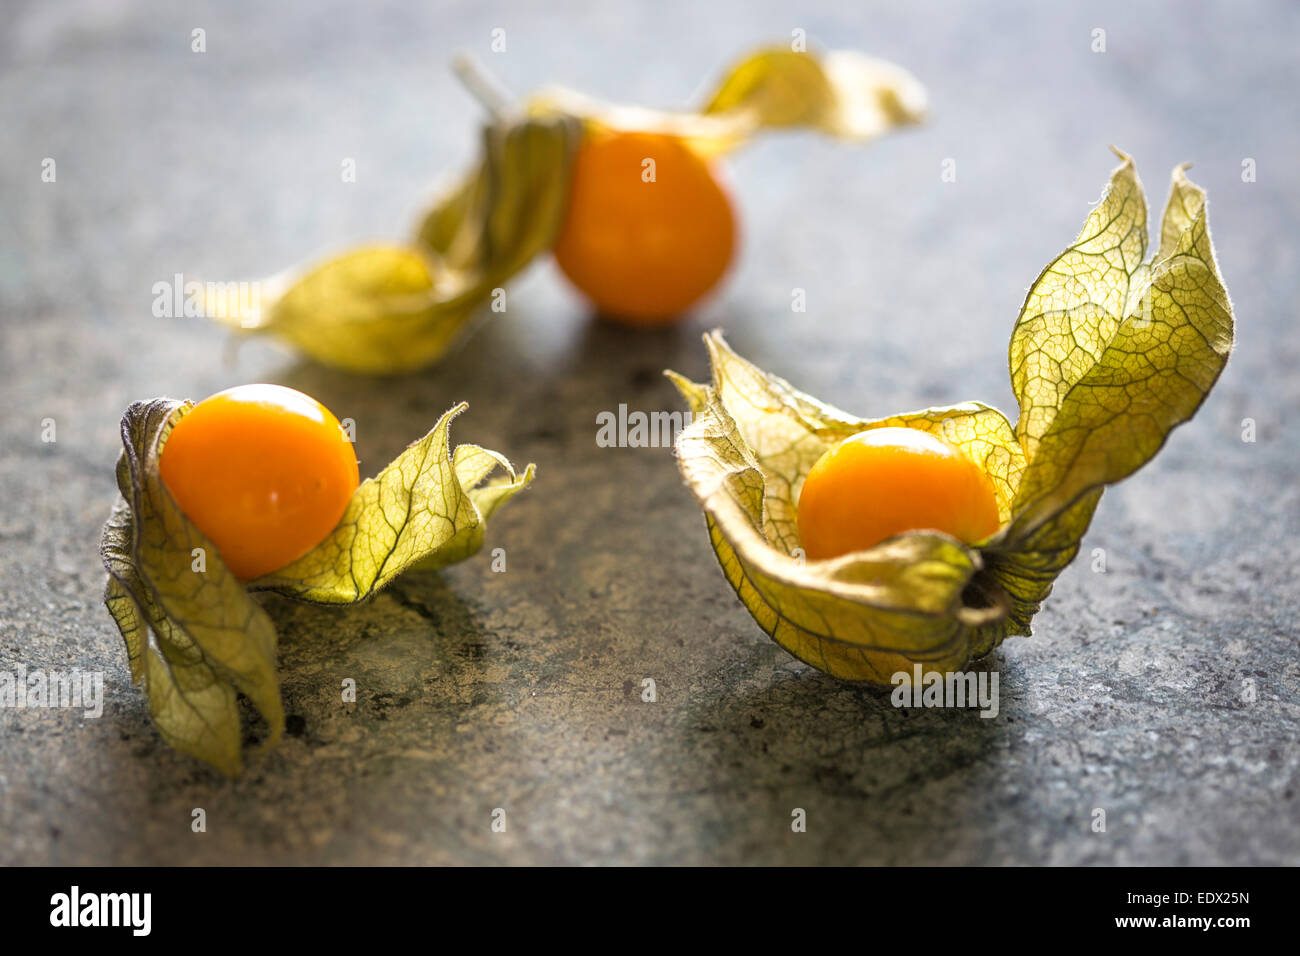 grouping of 3 physalis berries with delicate papery husk on green marble Stock Photo